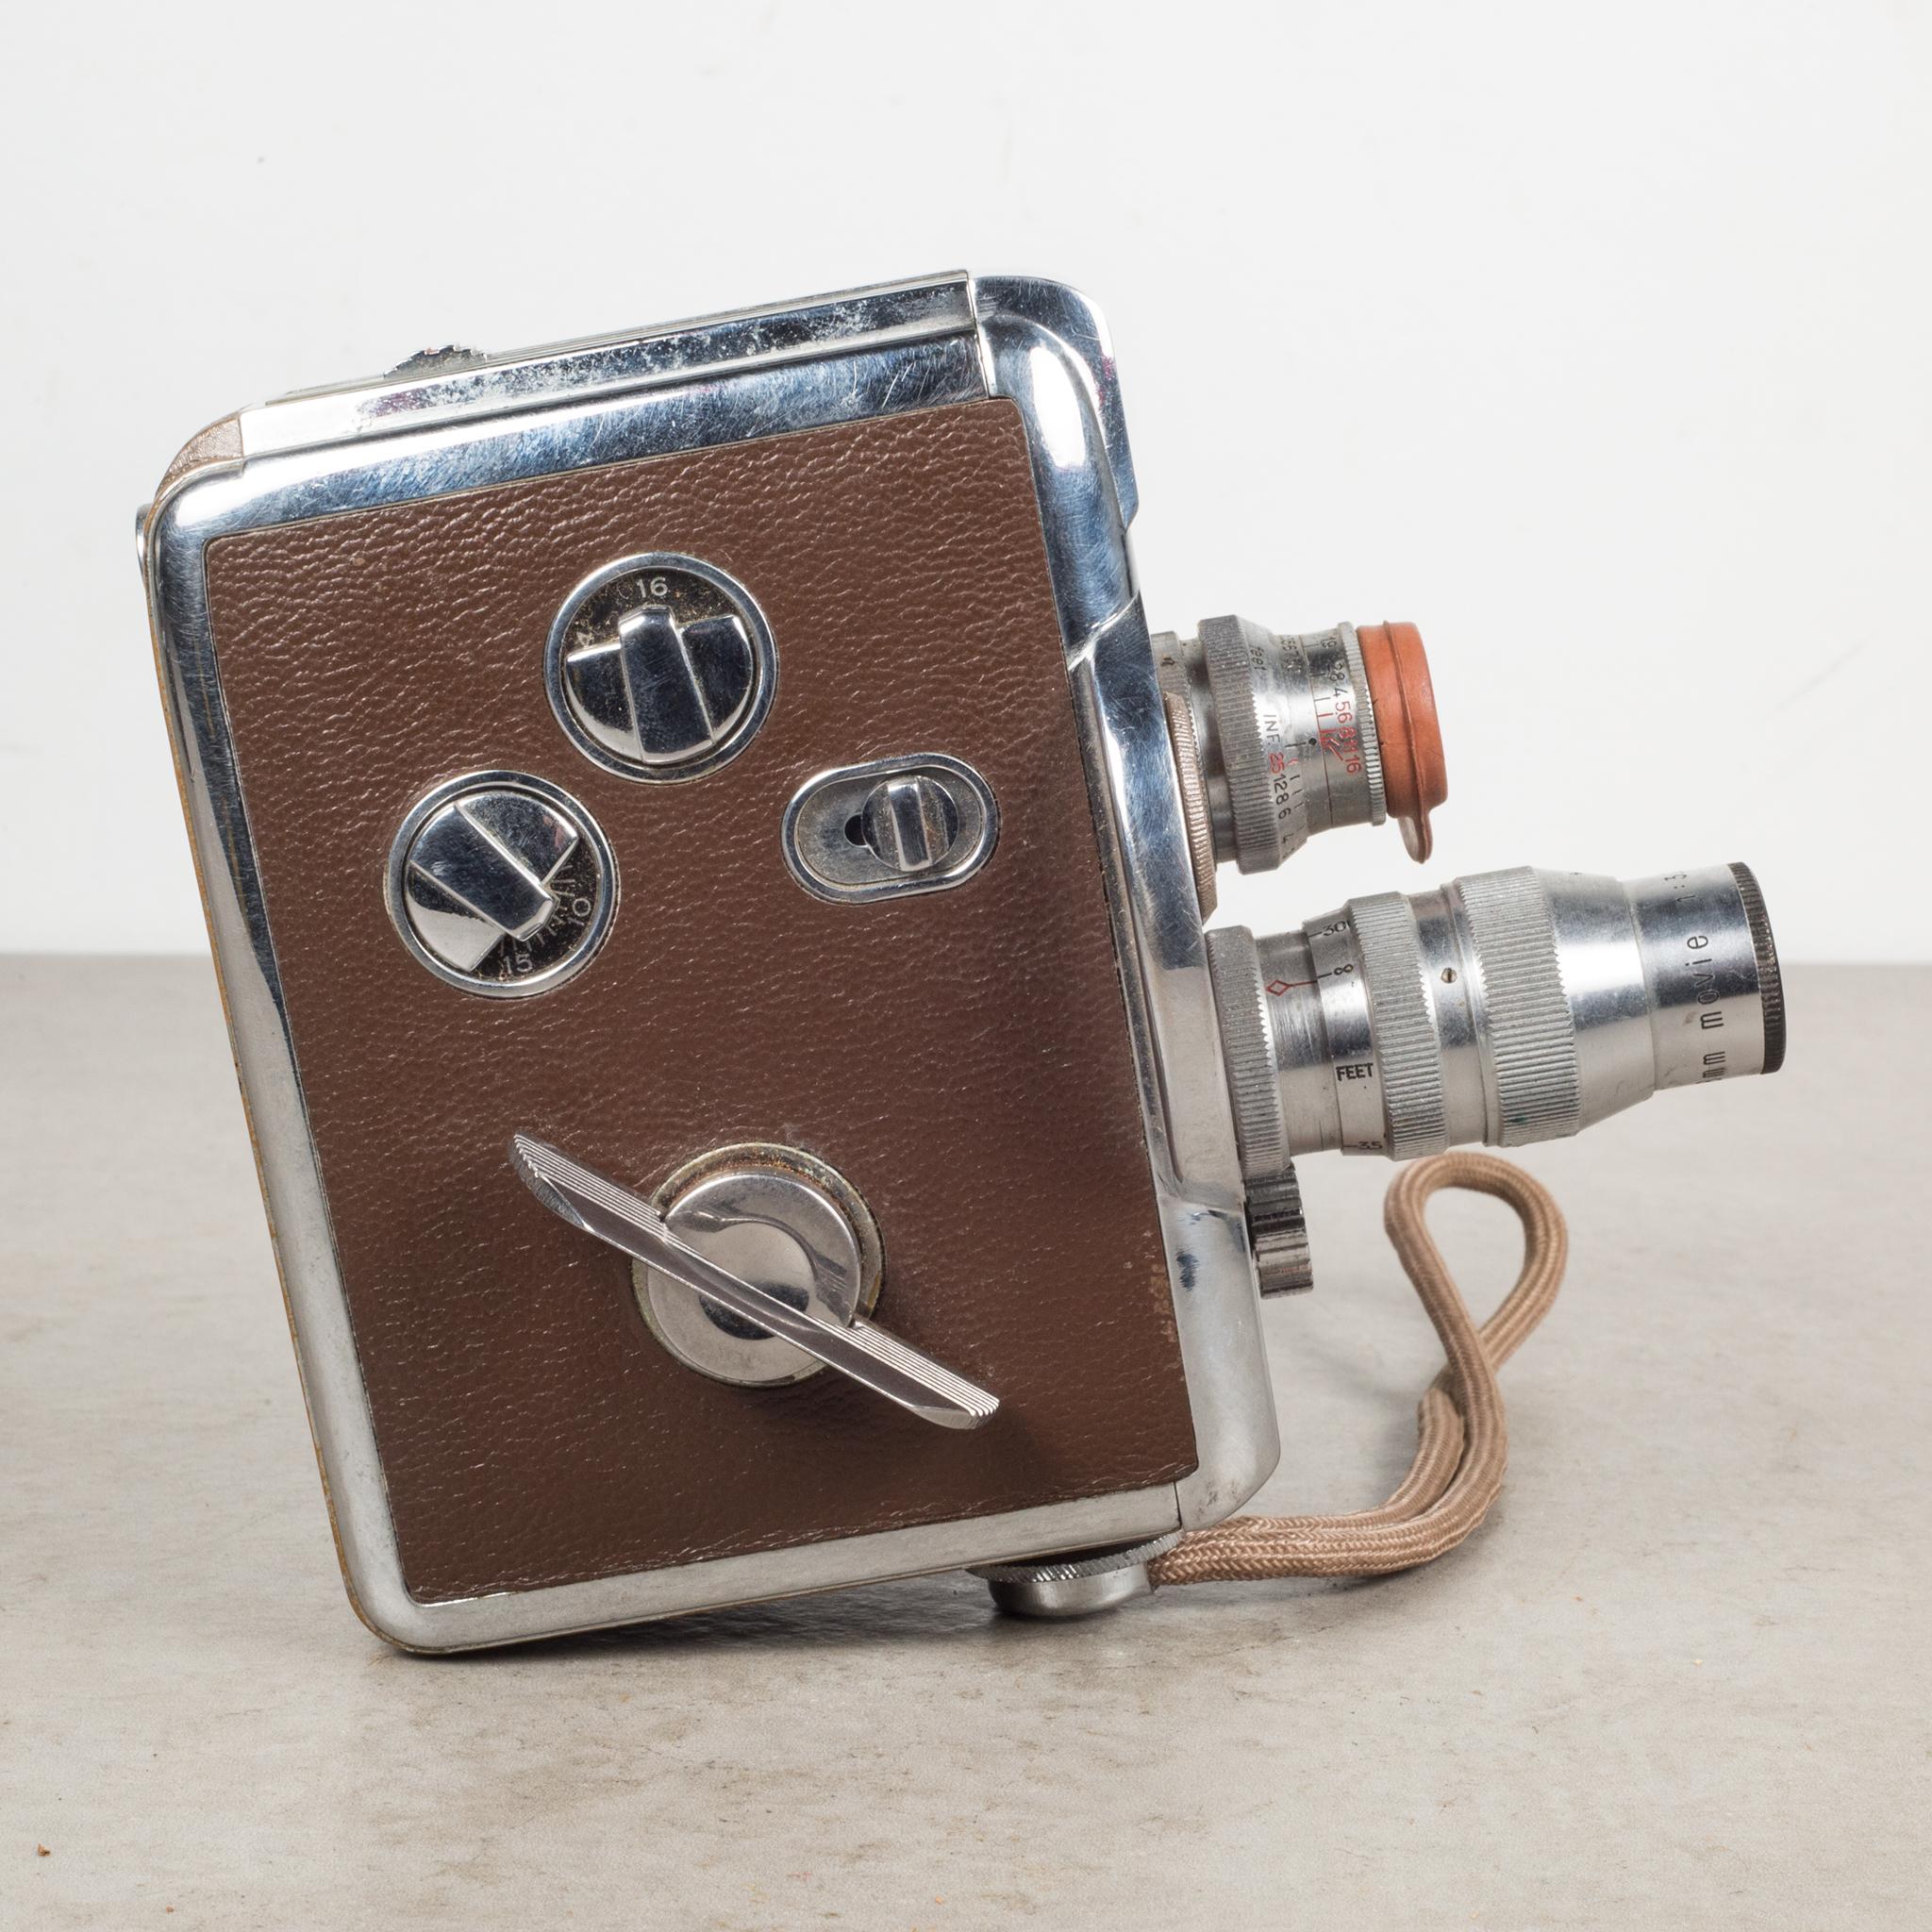 About

This is an original chrome and leather Revere 8 Model 44. This camera has retained its original finish. The camera may or may not operate. We are selling it as decorative only.

Creator Revere.
Date of manufacture circa 1950s.